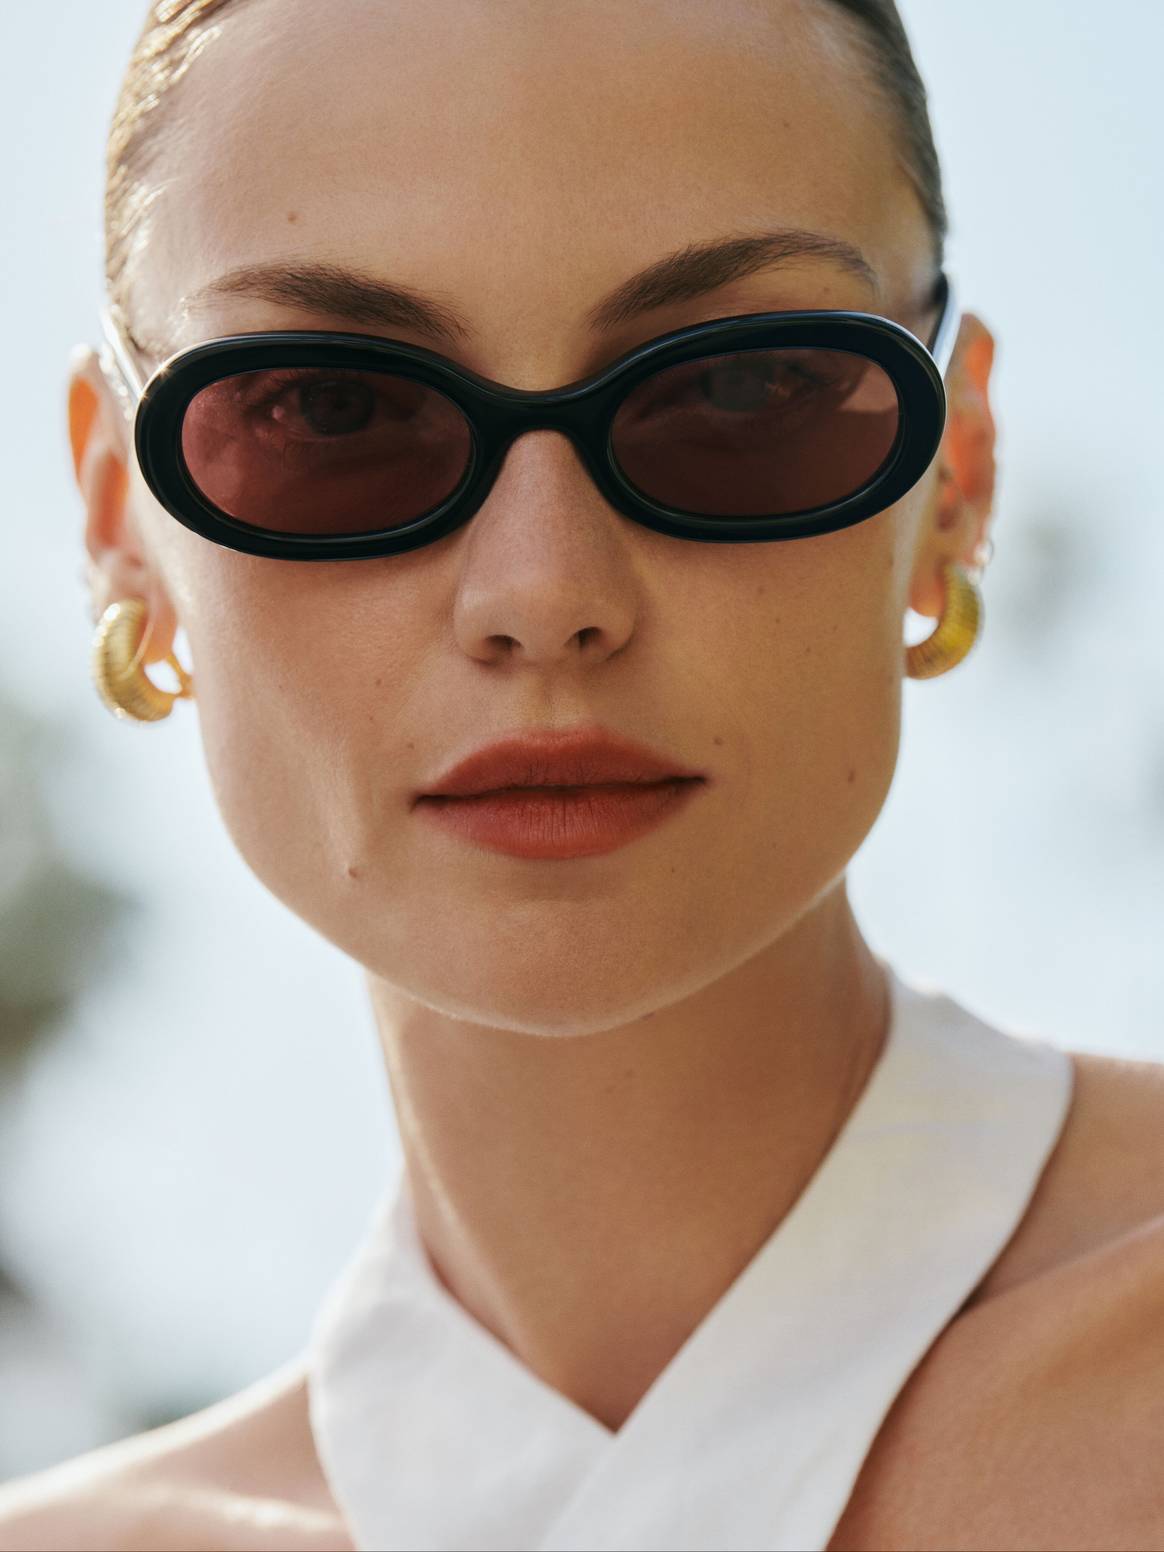 Reformation x Jimmy Fairly sunglasses collection